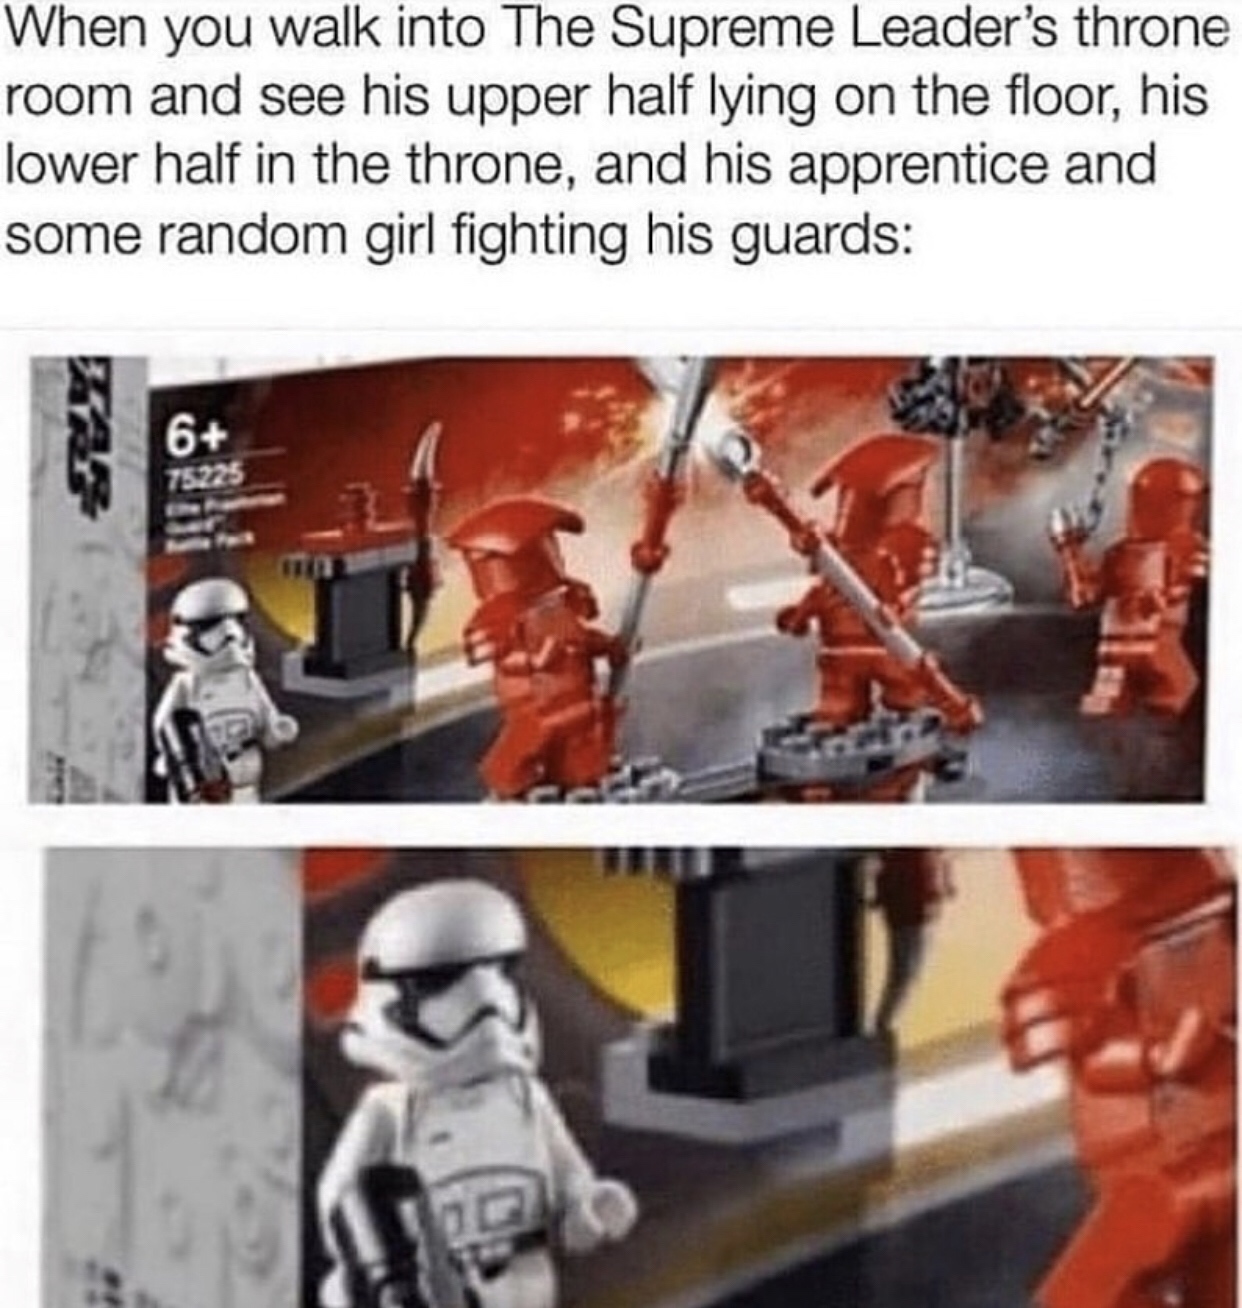 lego 75225 meme - When you walk into The Supreme Leader's throne room and see his upper half lying on the floor, his lower half in the throne, and his apprentice and some random girl fighting his guards